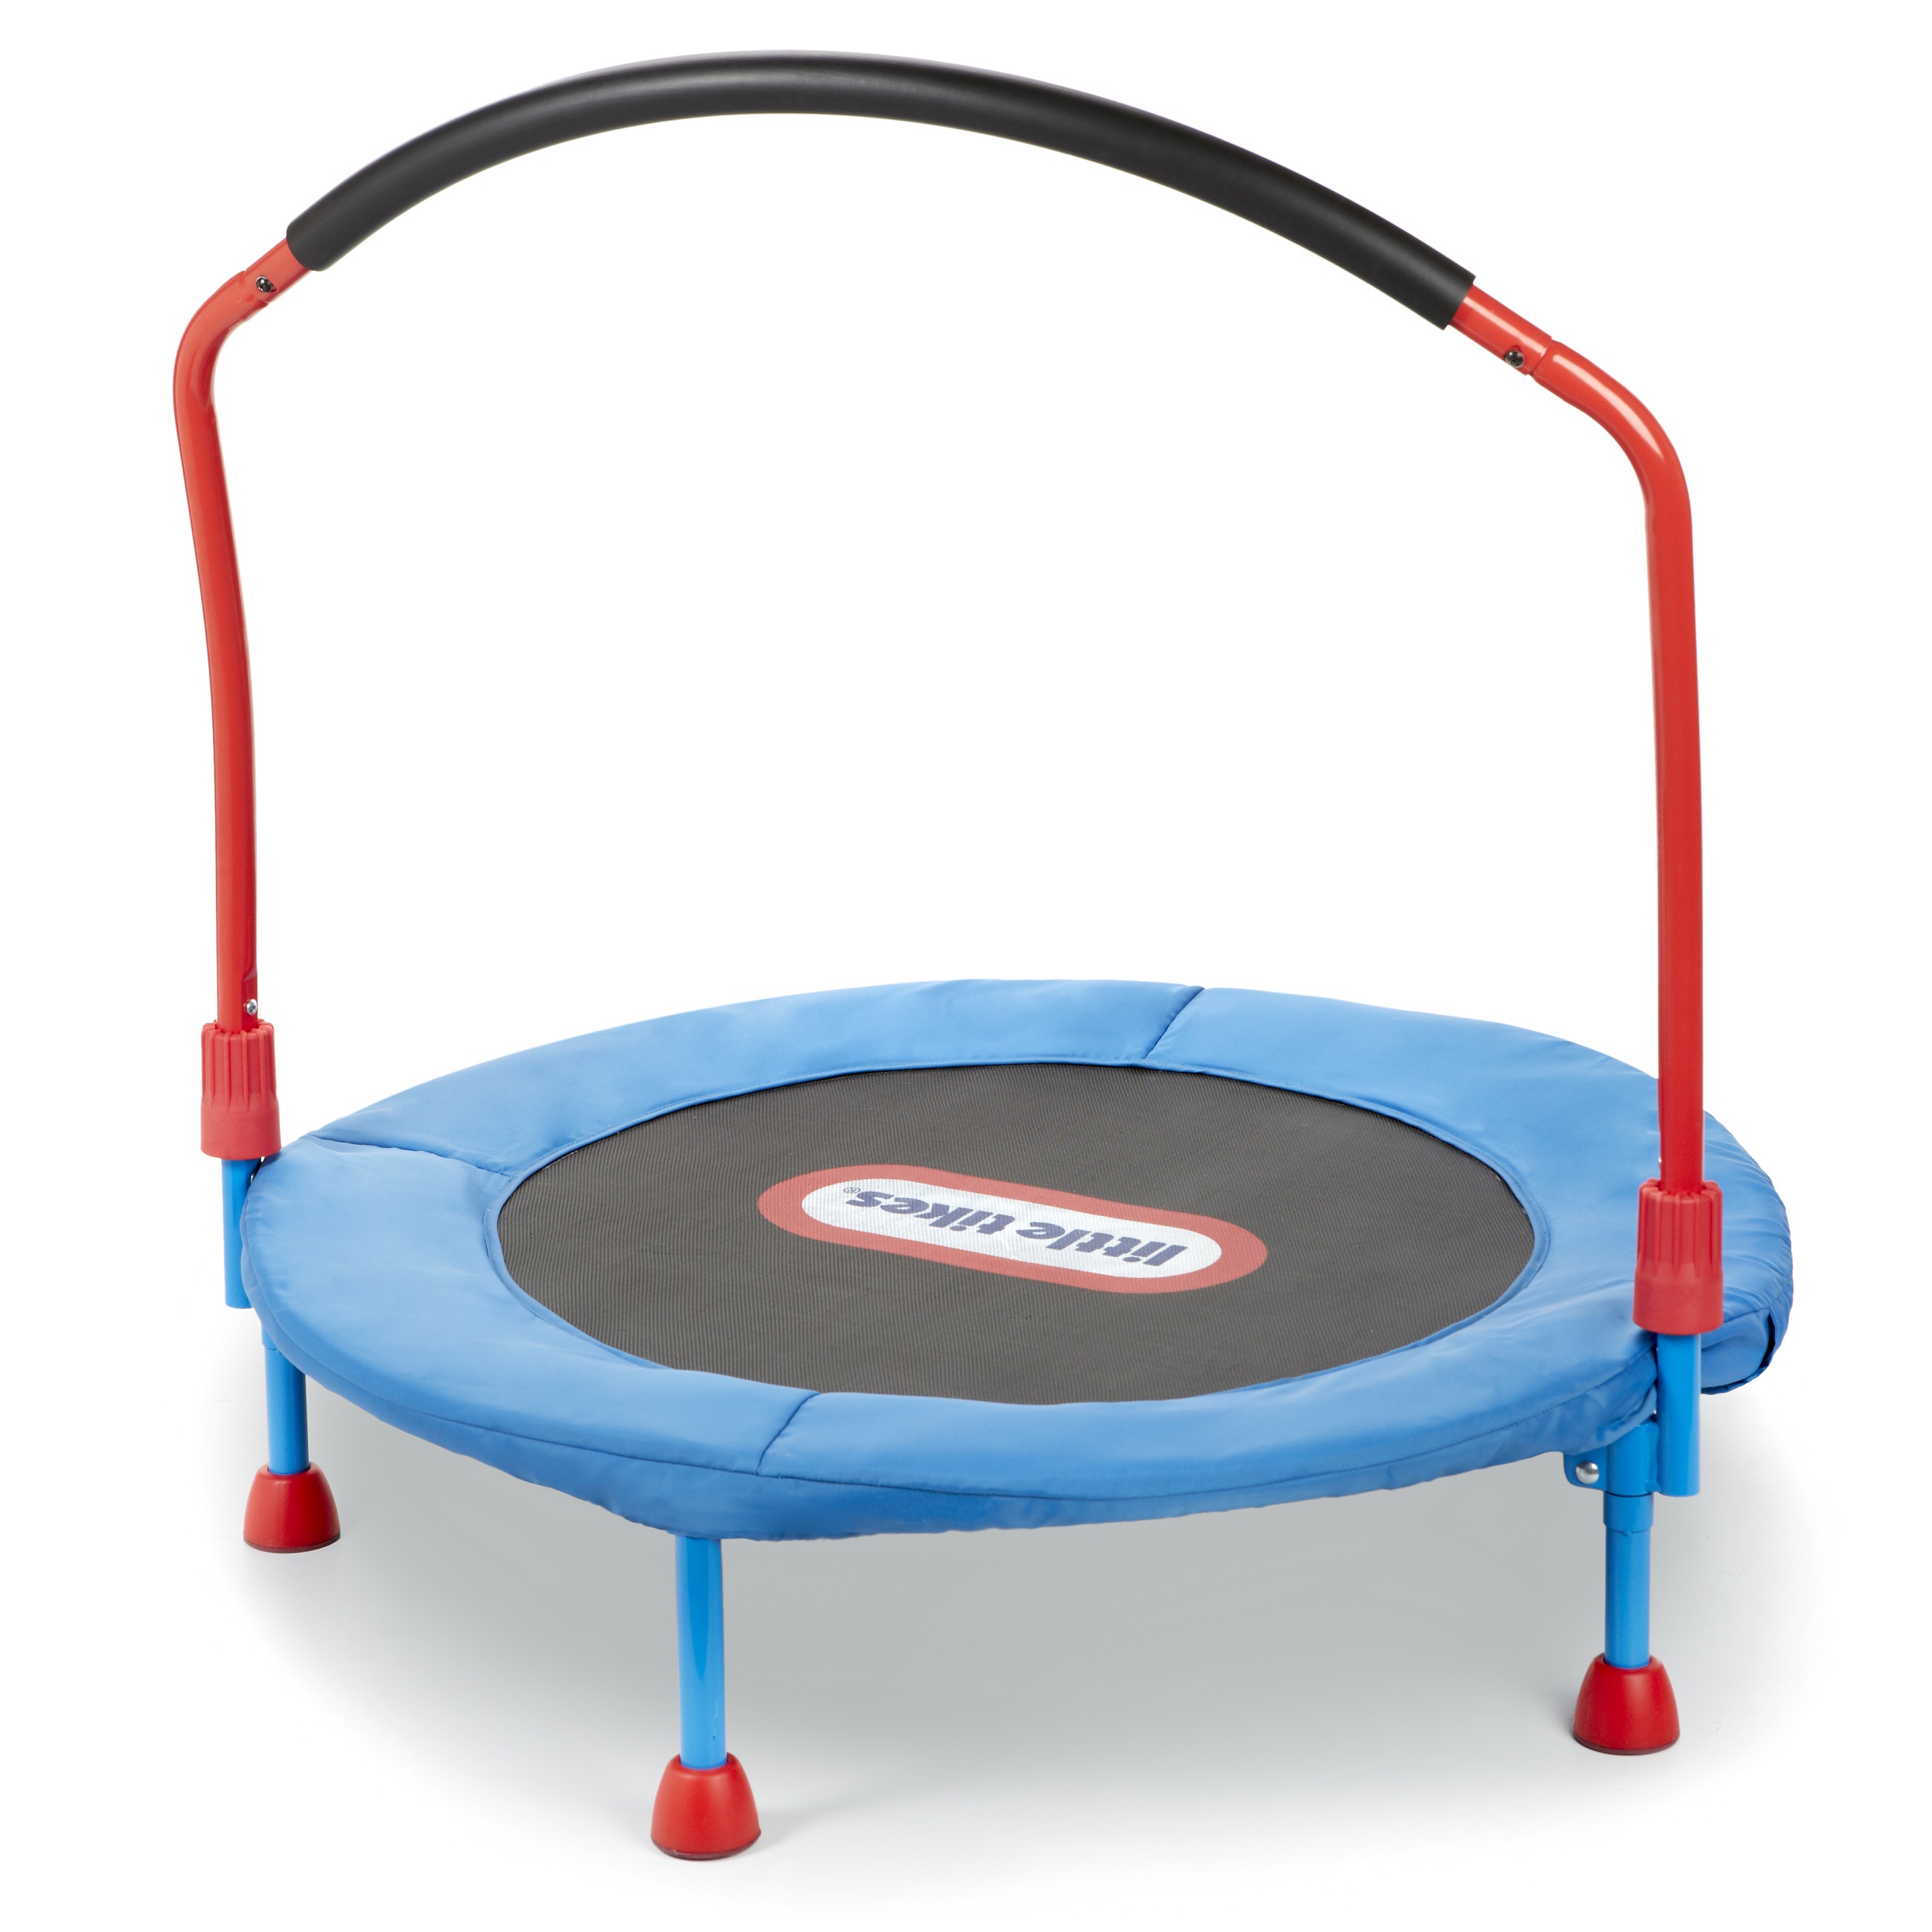 Little Tikes Easy Store 3-Foot Trampoline, with Hand Rail, Blue - image 1 of 8